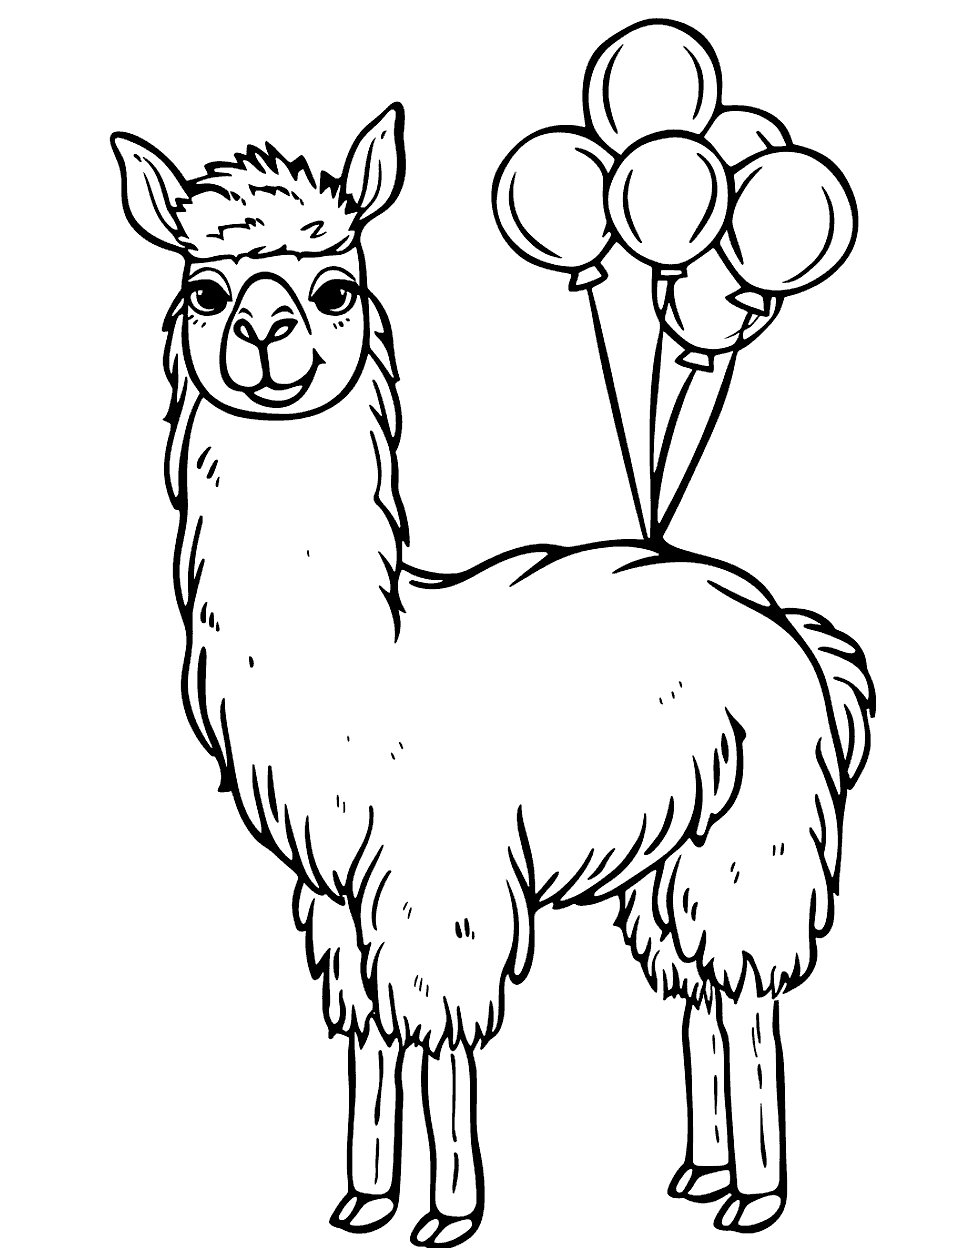 Llama with Balloons Coloring Page - A joyful llama tied with bunch of balloons.